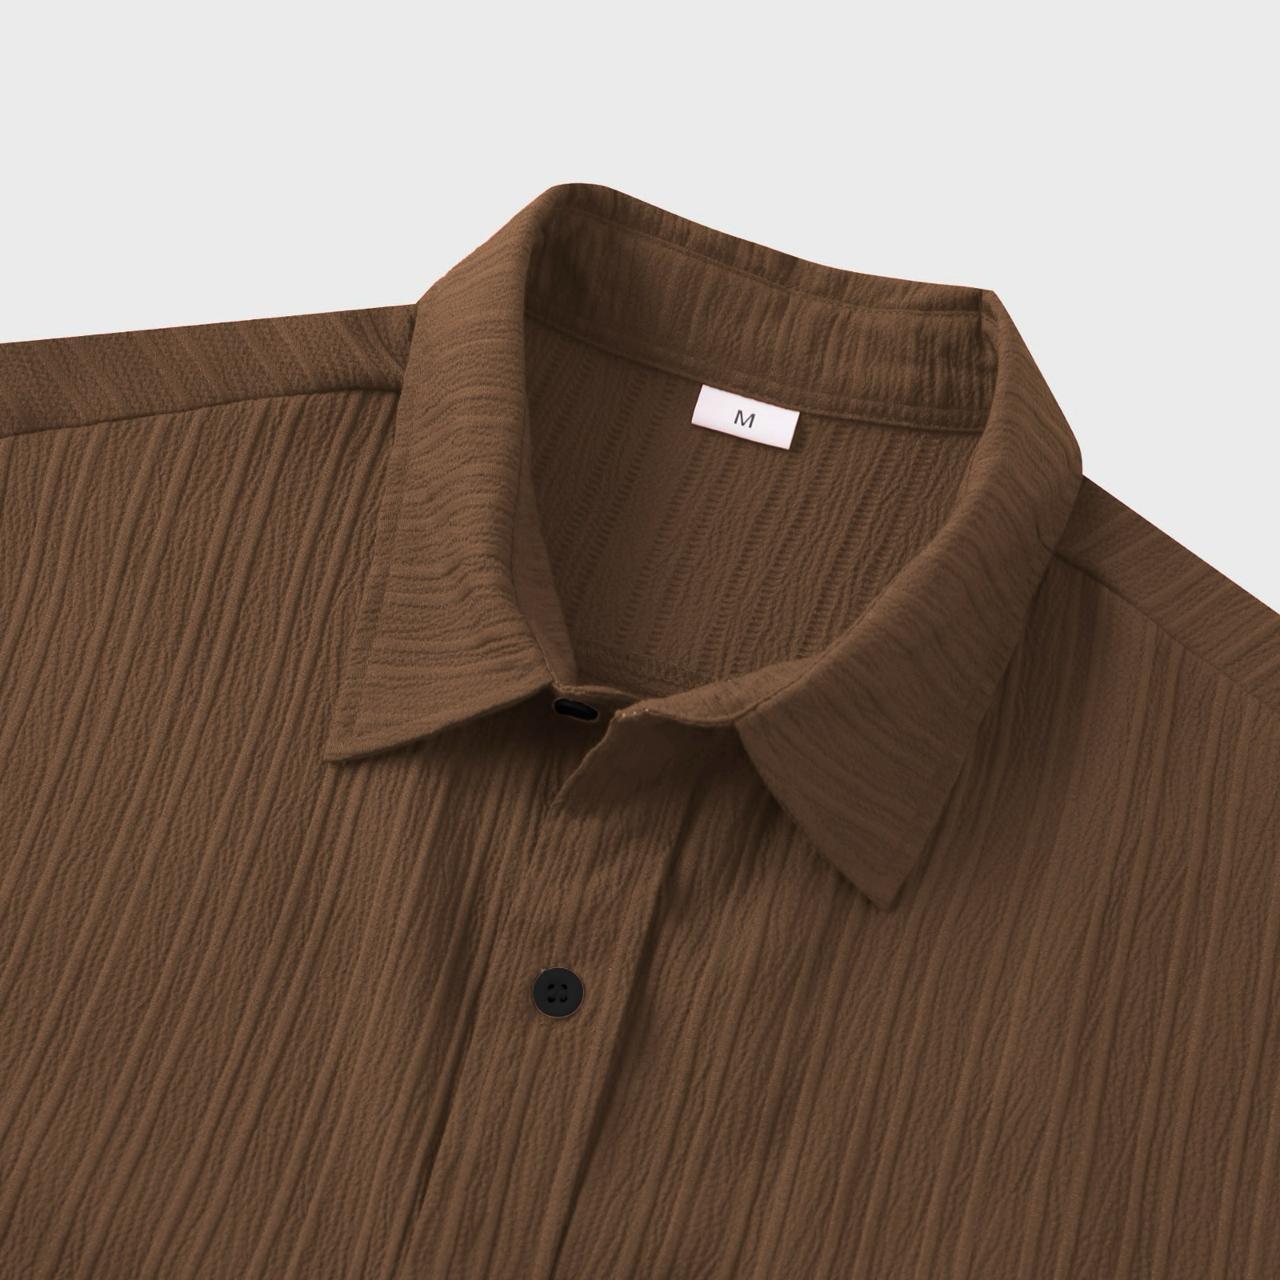 Brown Colour Premium Lining Structured Short Sleeve Shirt